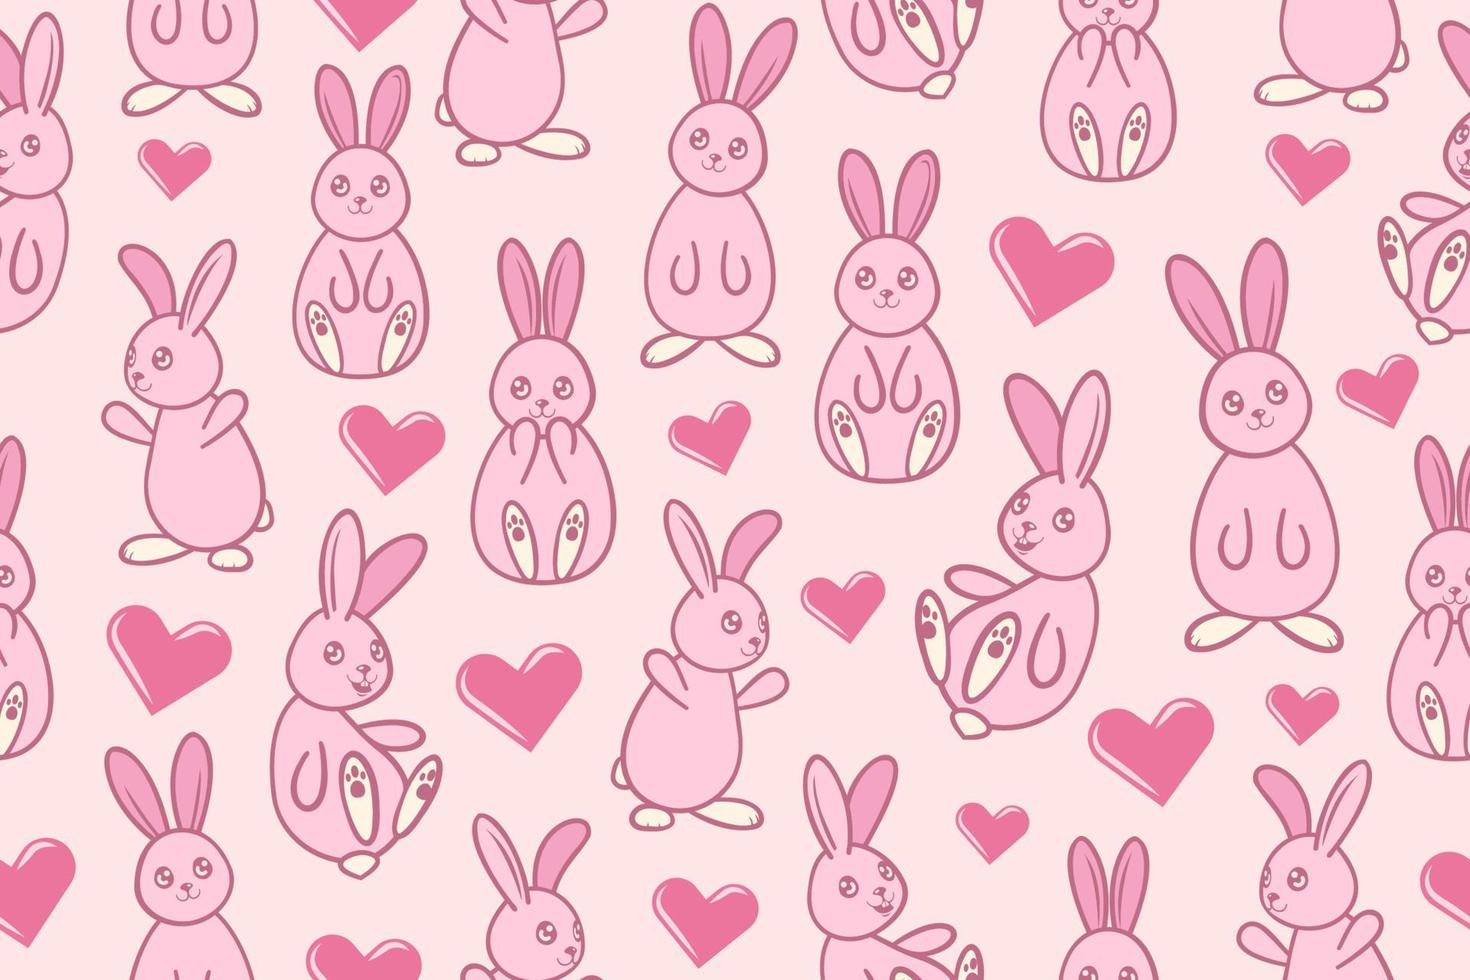 Pink bunnies and hearts seamless pattern. repeating rabbits in different direction repeating pattern. vector